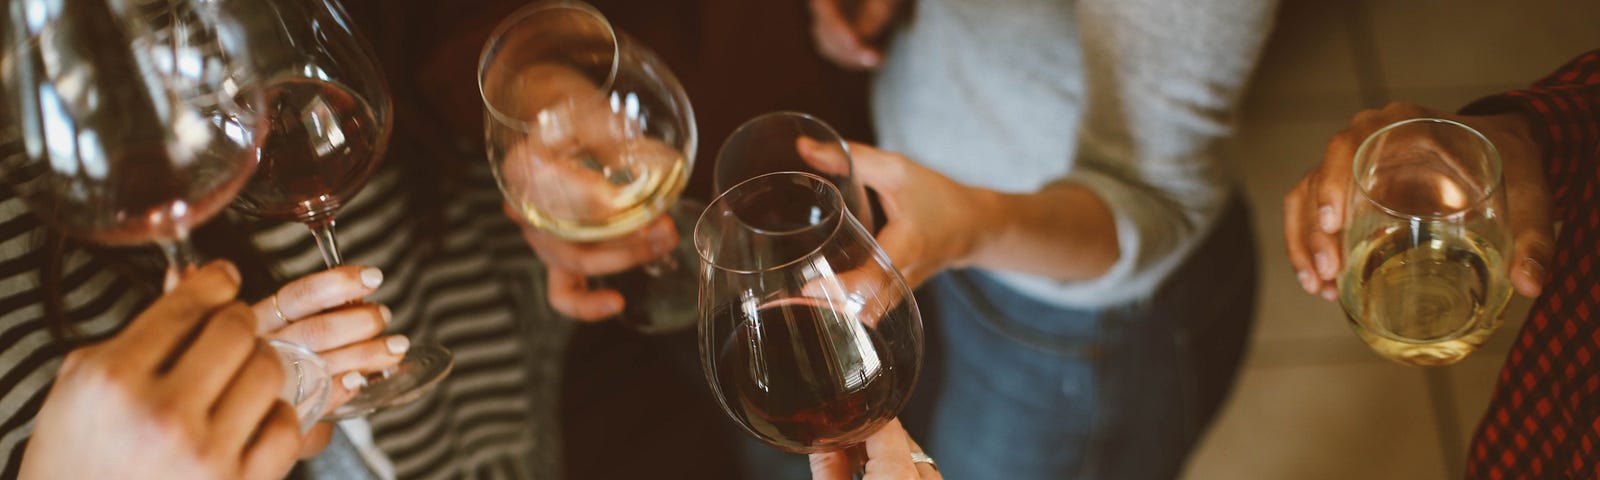 Several hands raise glasses of white wine, with the image from taken from above. A new study suggests that one or two drinks daily are not better than abstaining